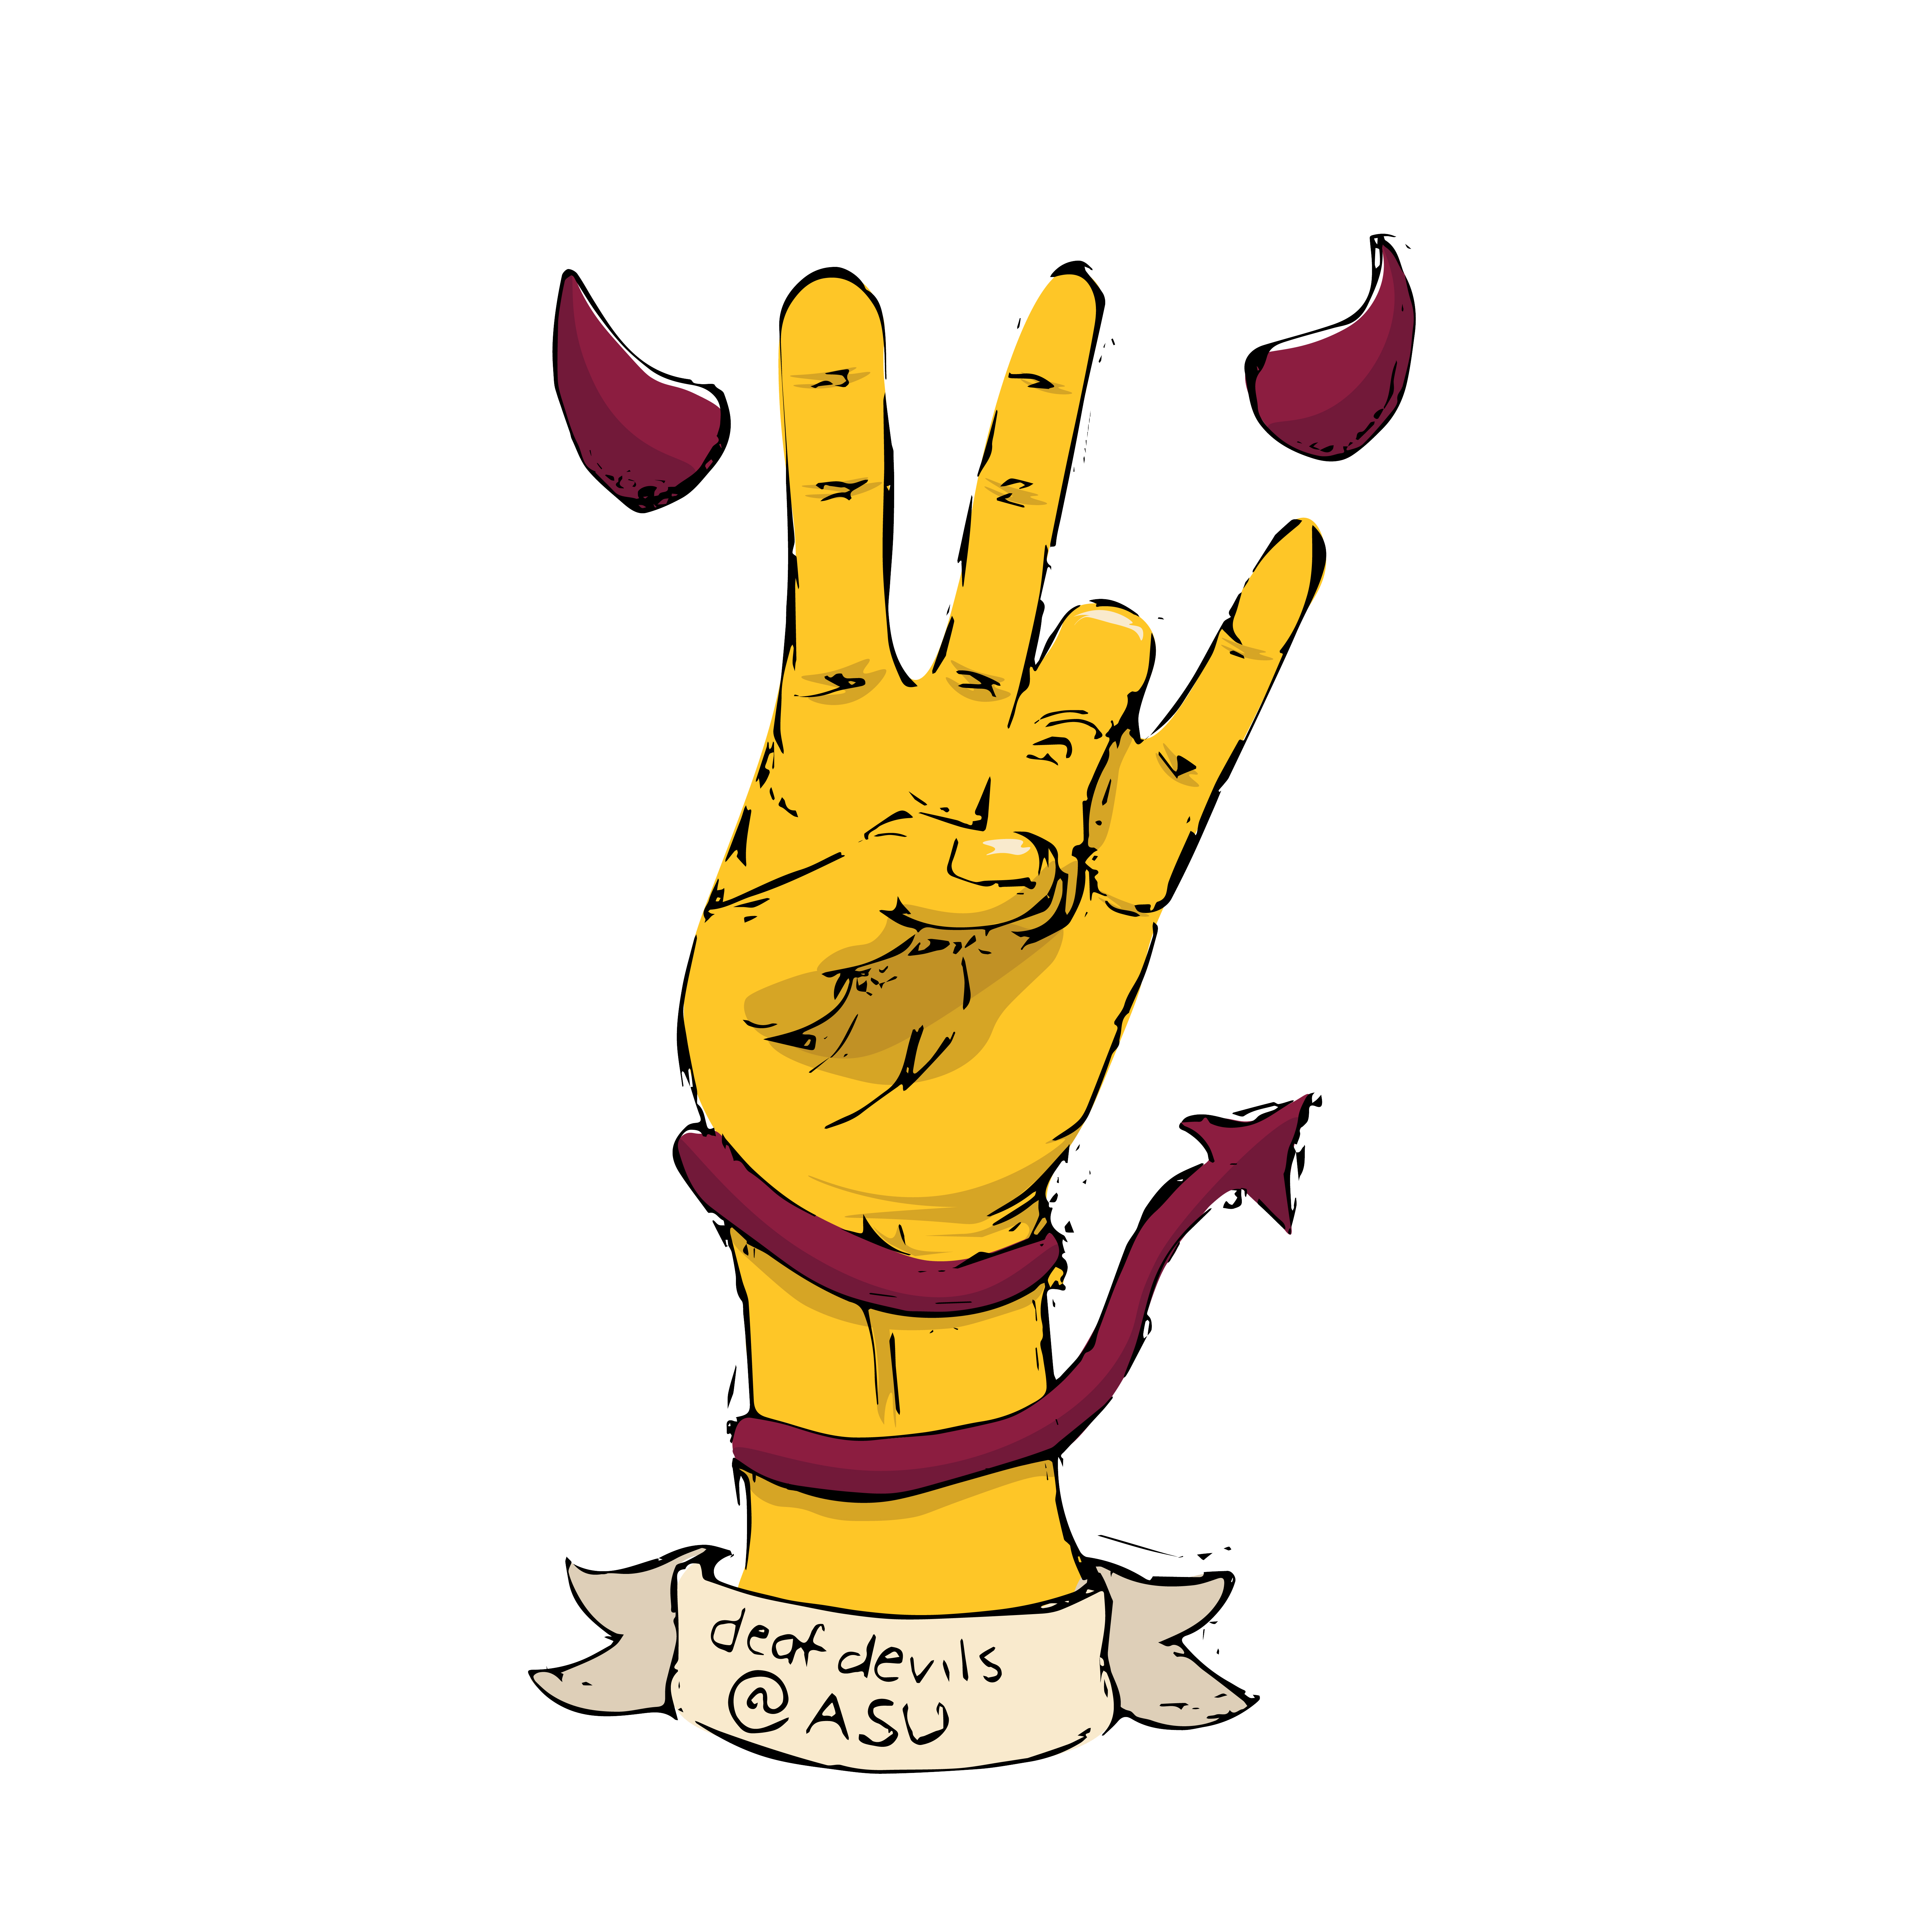 Gold hand in a pitchfork with small banner scrip "Deaf Devils @ ASU"